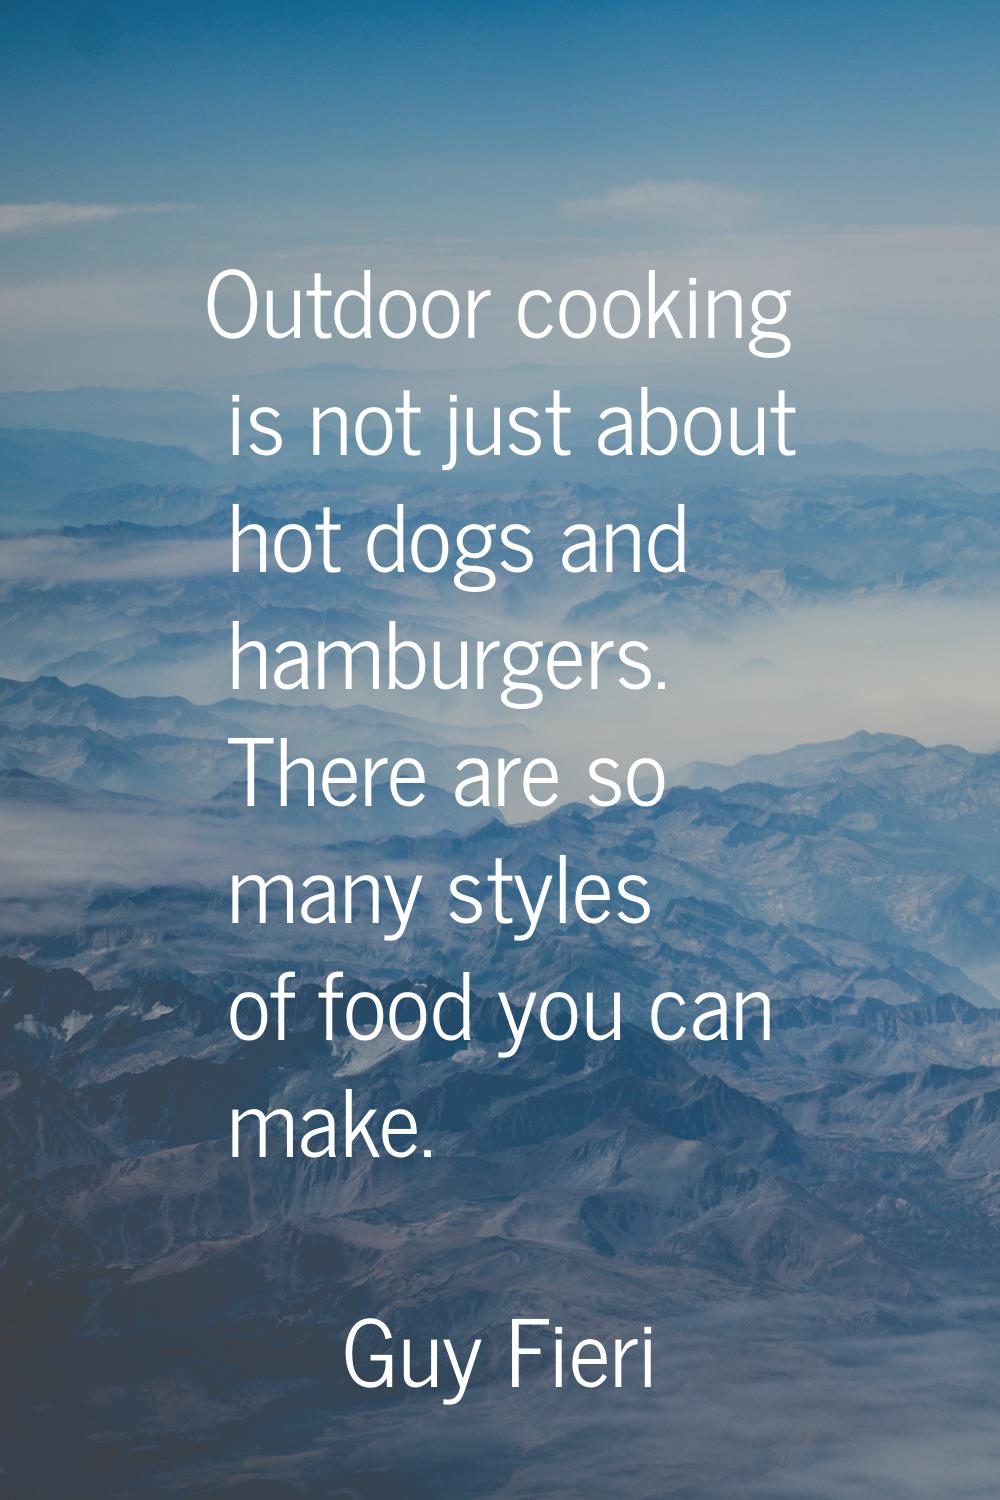 Outdoor cooking is not just about hot dogs and hamburgers. There are so many styles of food you can